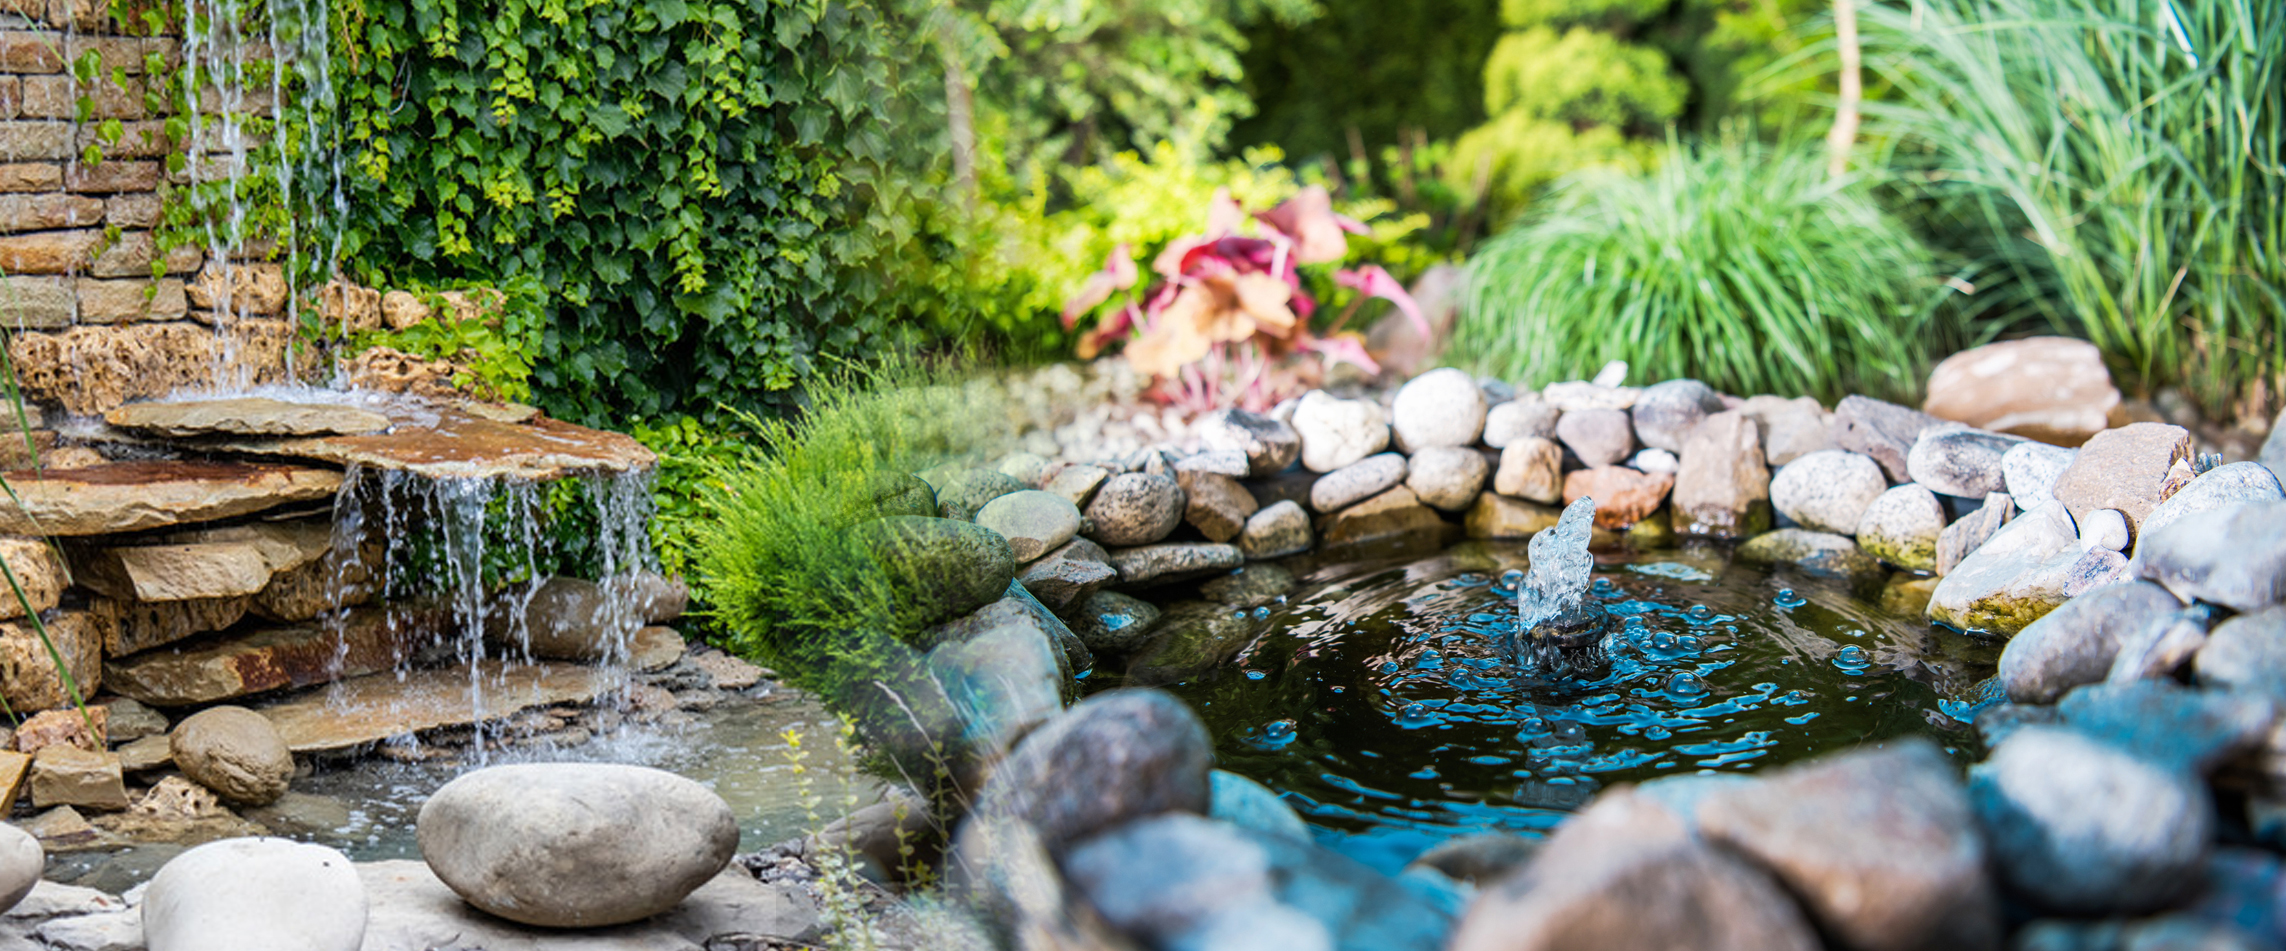 The 5 Benefits of Adding Water Features To Your Backyard